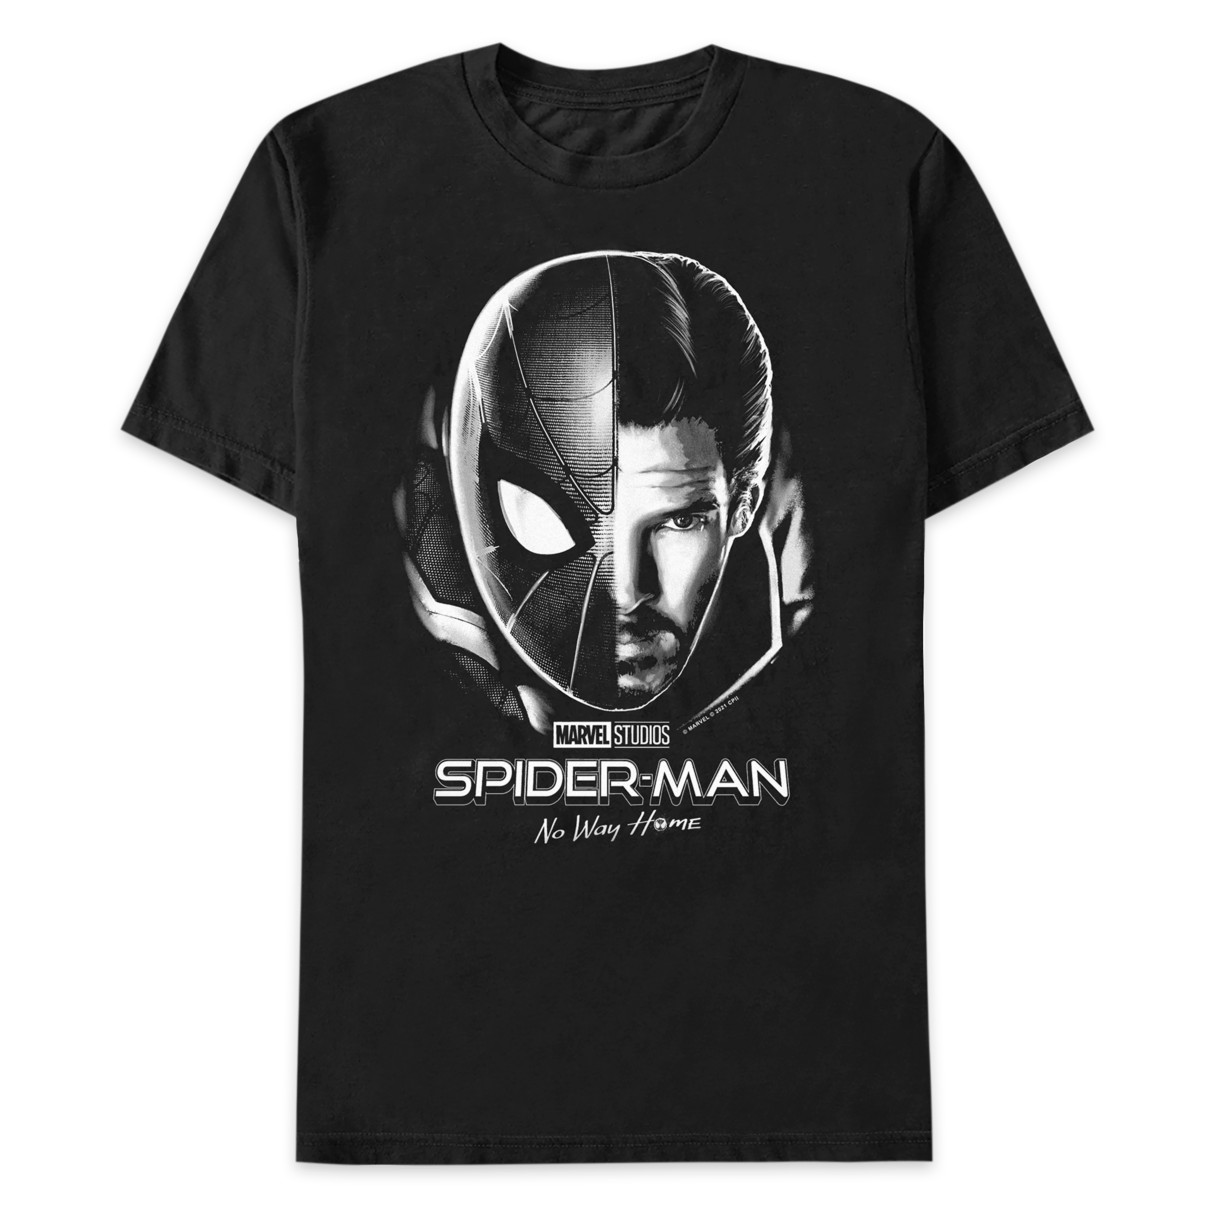 Spider-Man and Doctor Strange T-Shirt for Adults – Spider-Man: No Way Home